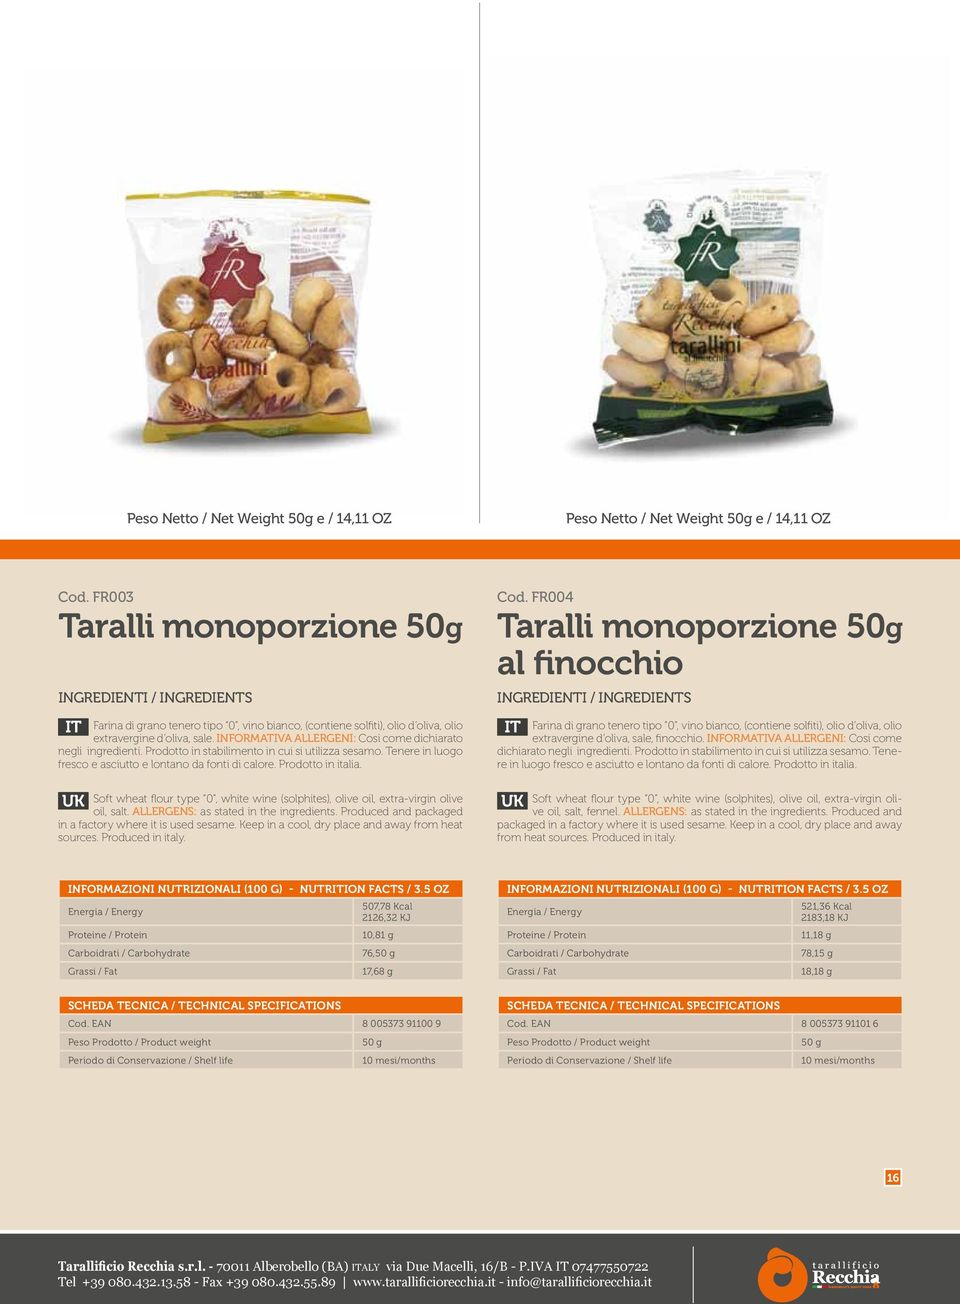 Tenere in luogo oil, salt. ALLERGENS: as stated in the ingredients. Produced and packaged in a factory where it is used sesame. Keep in a cool, dry place and away from heat sources. Produced in italy.